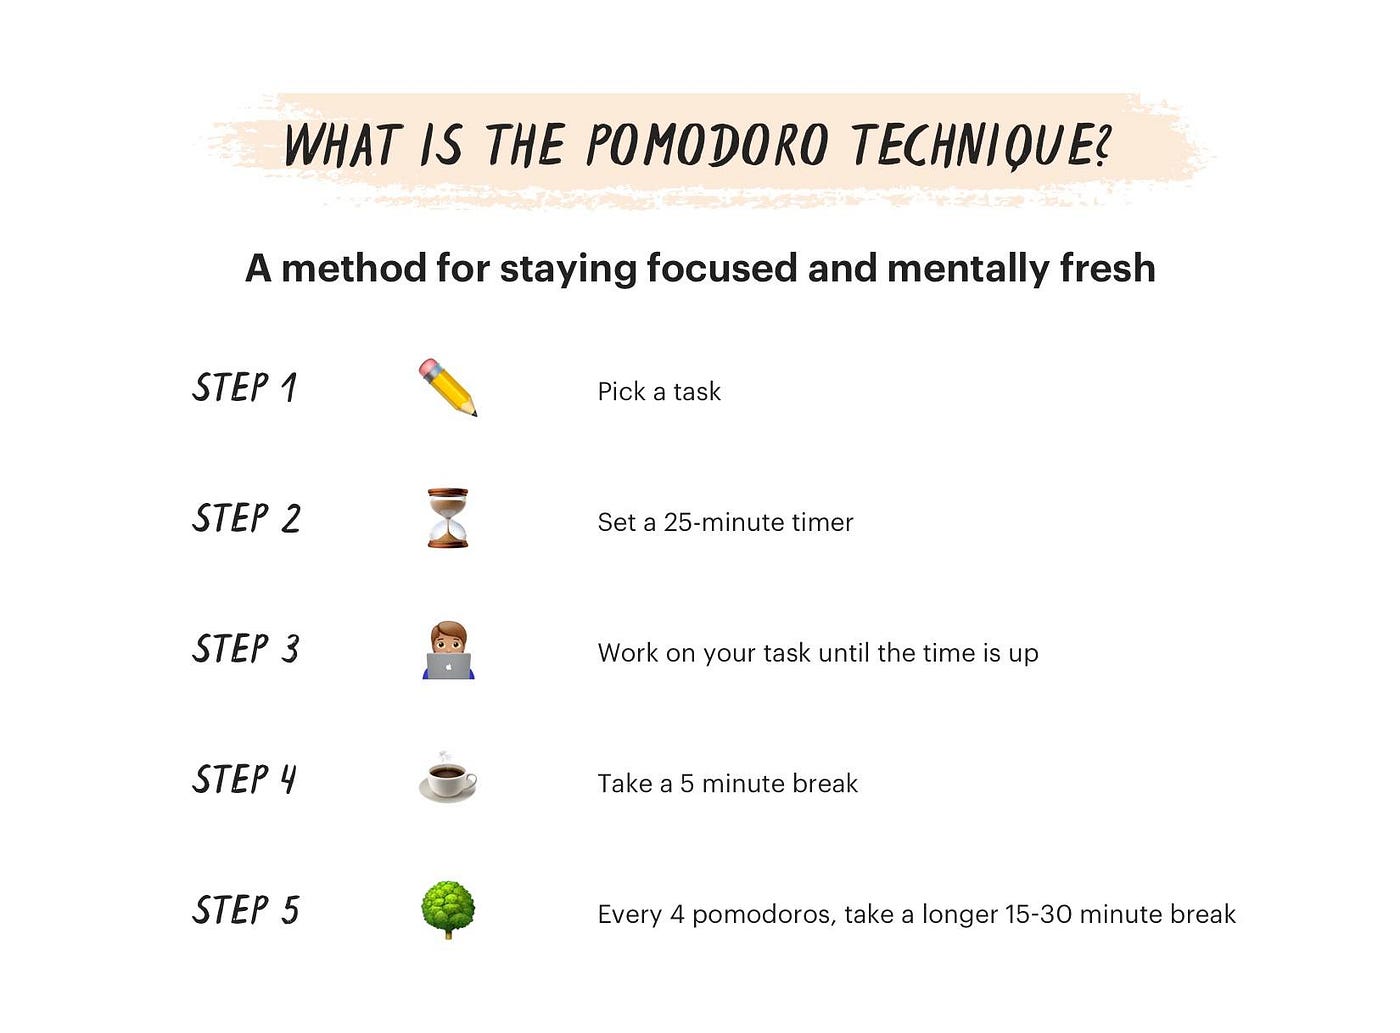 Image of how to do the pomodoro technique. Step 1: pick a task, step 2: set a 25-minute timer, step 3: work on your task until the time is up, step 4: take a 5 minute break, step 5: every 4 pomodoros, take a longer 15 to 30 minute break.